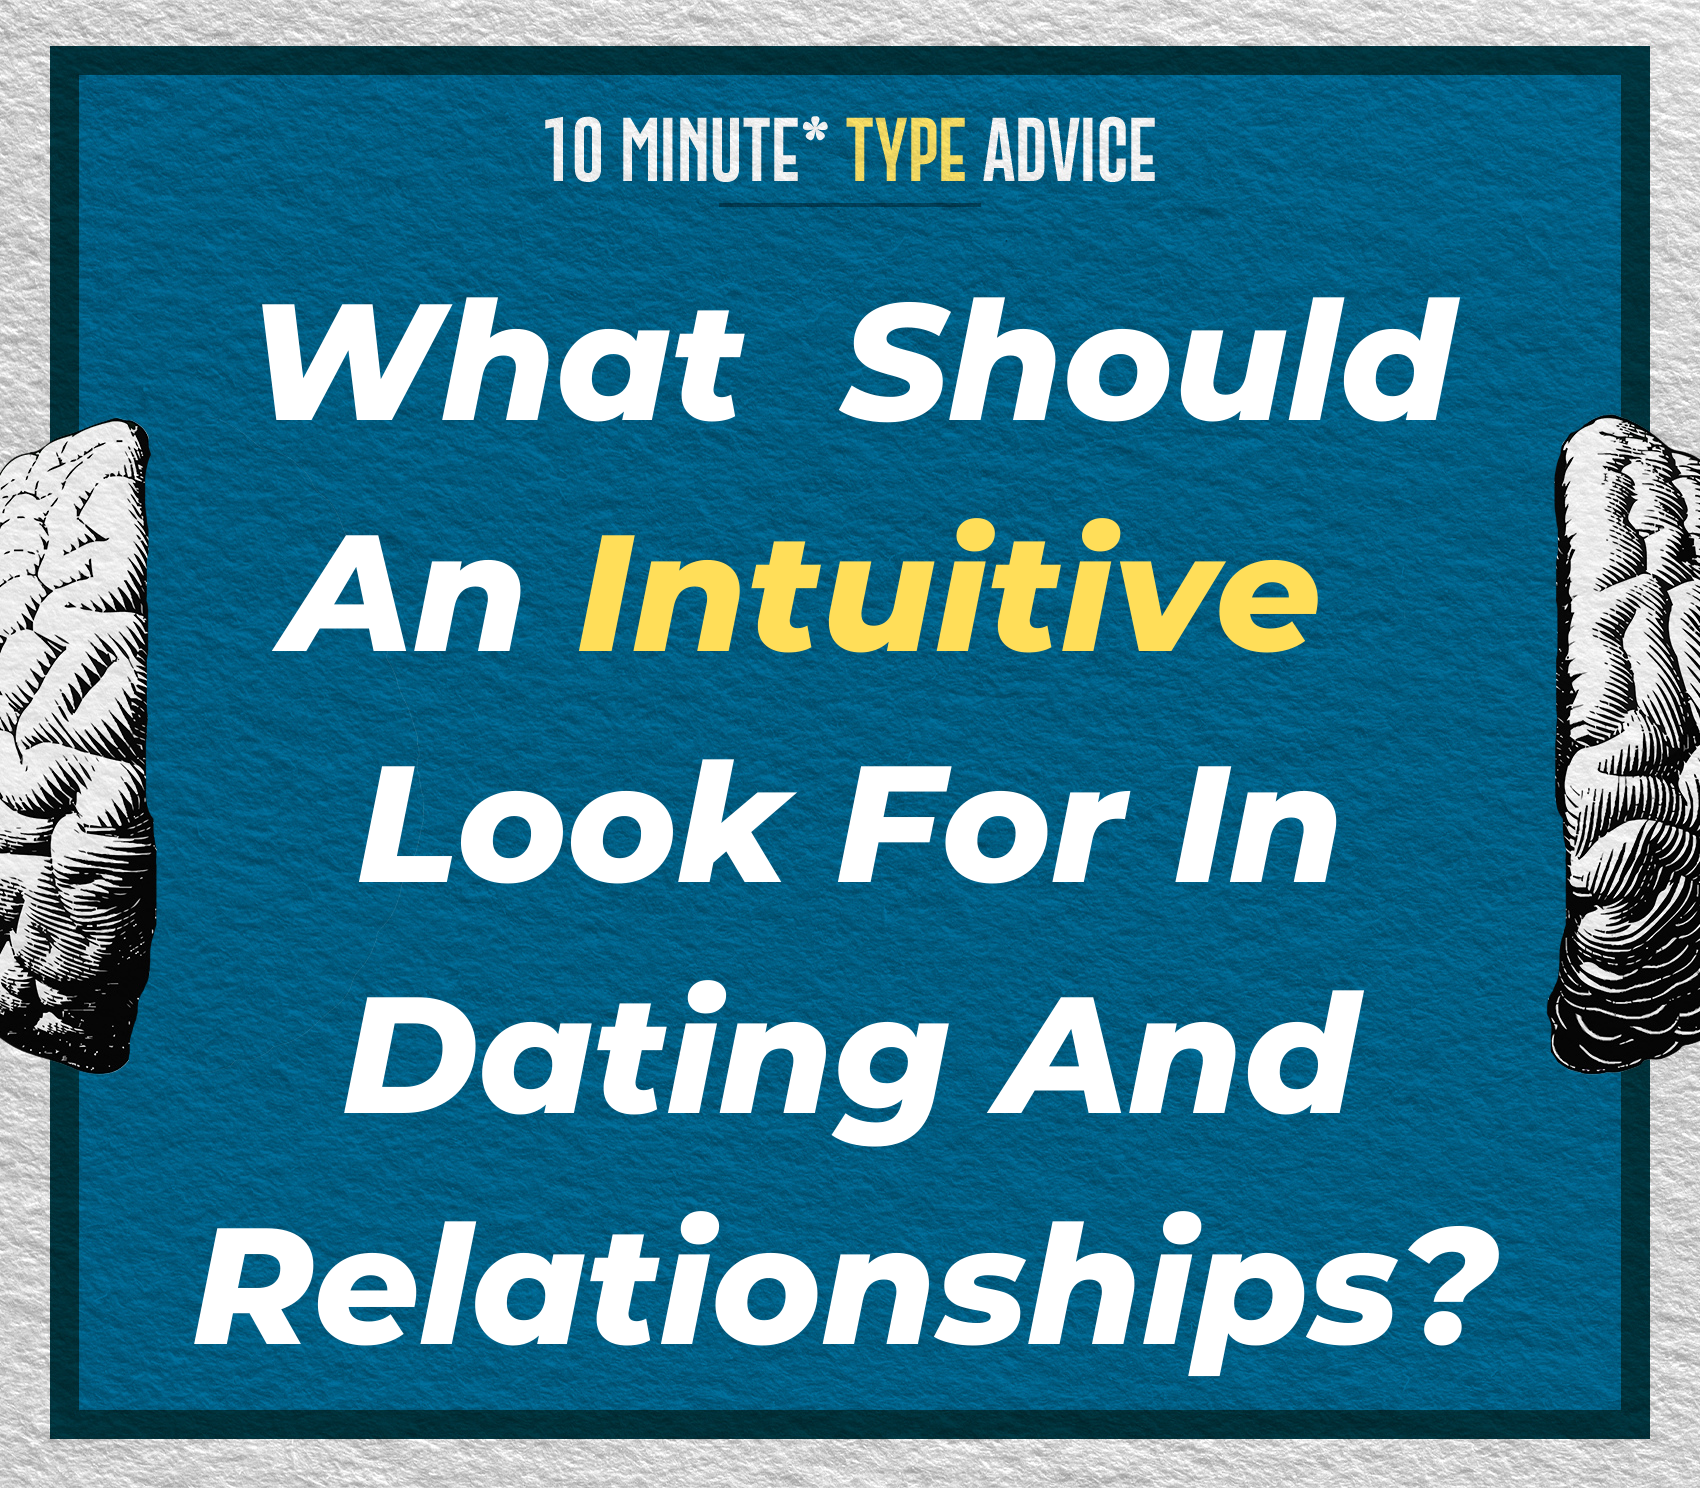 What Should An Intuitive Look For In Dating And Relationships? | 10 Min Type Advice | S01:E04